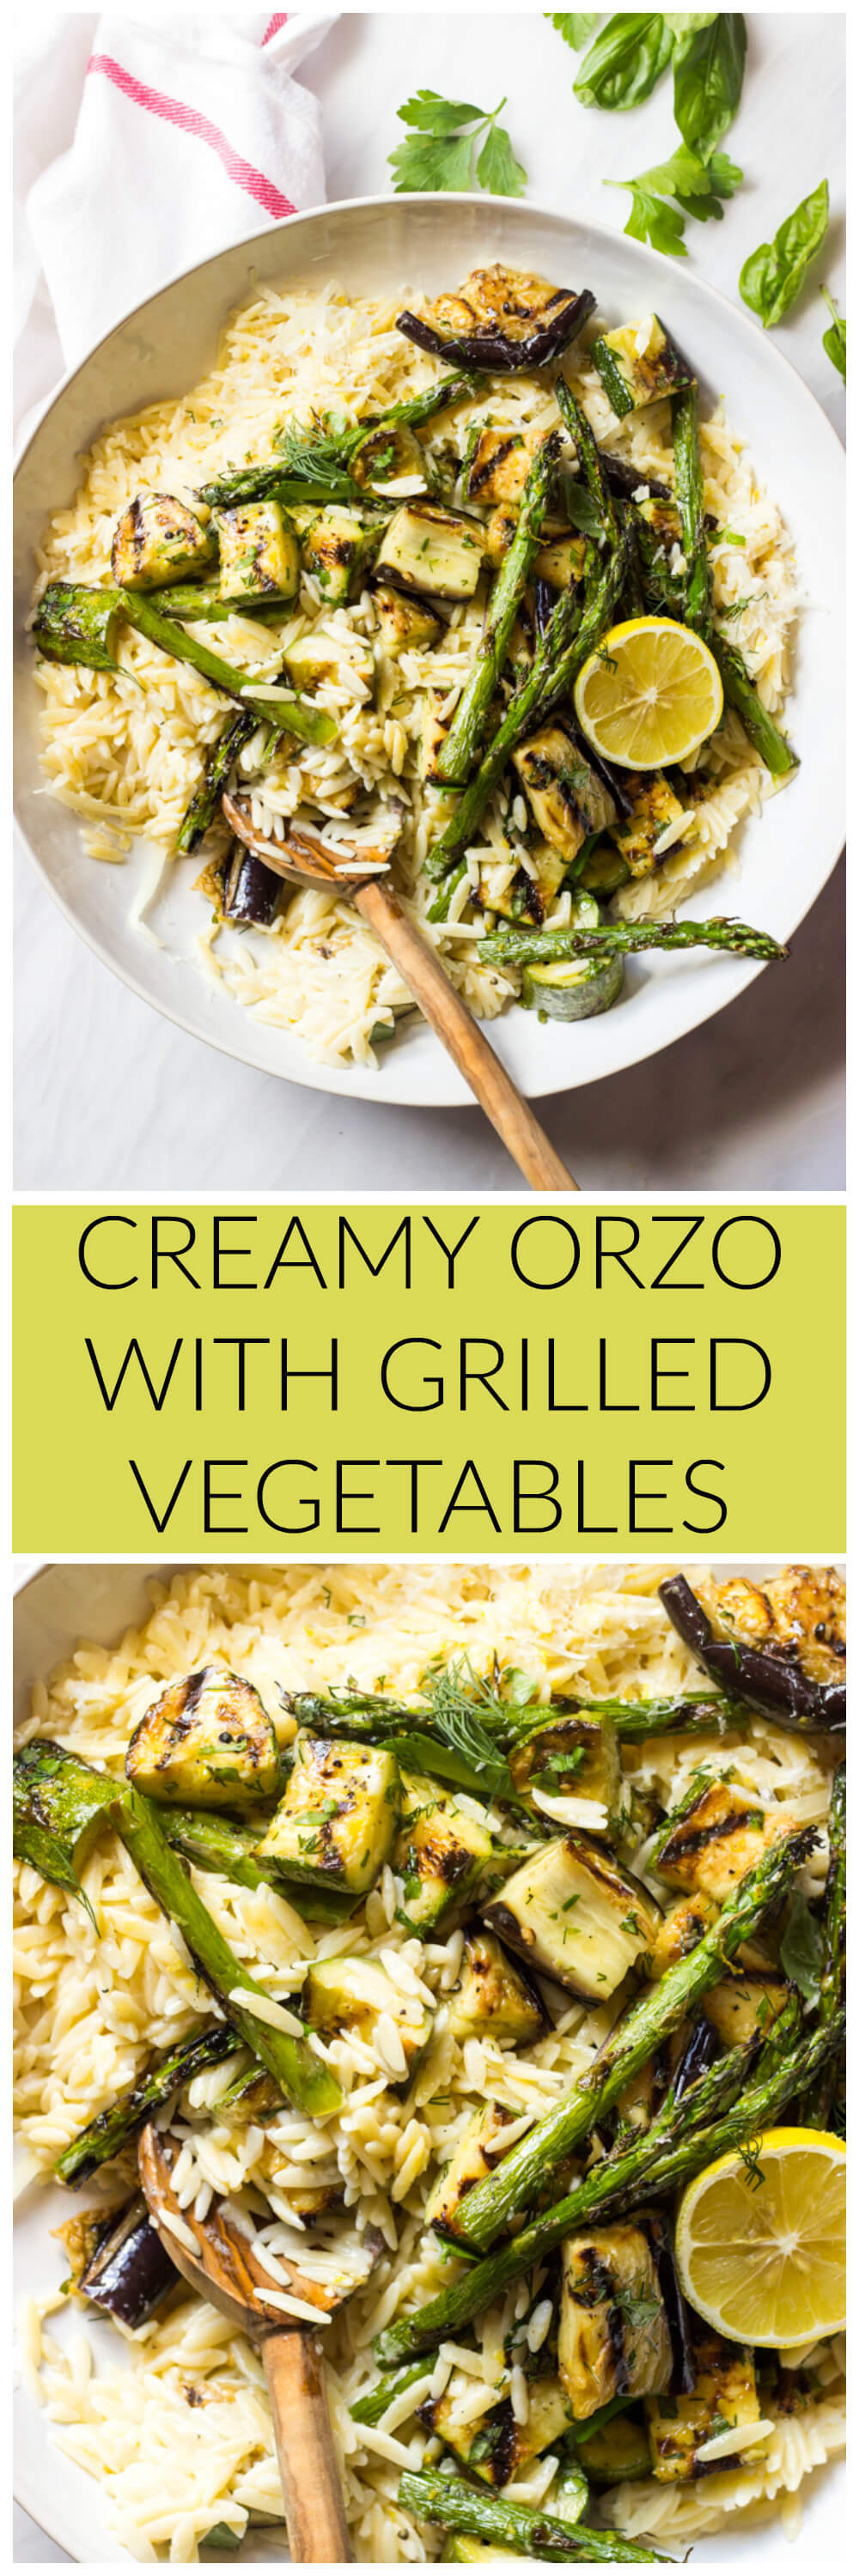 Creamy Orzo with Grilled Vegetables - grilled vegetables tossed in simple garlic herb vinaigrette and served over creamy orzo | littlebroken.com @littlebroken